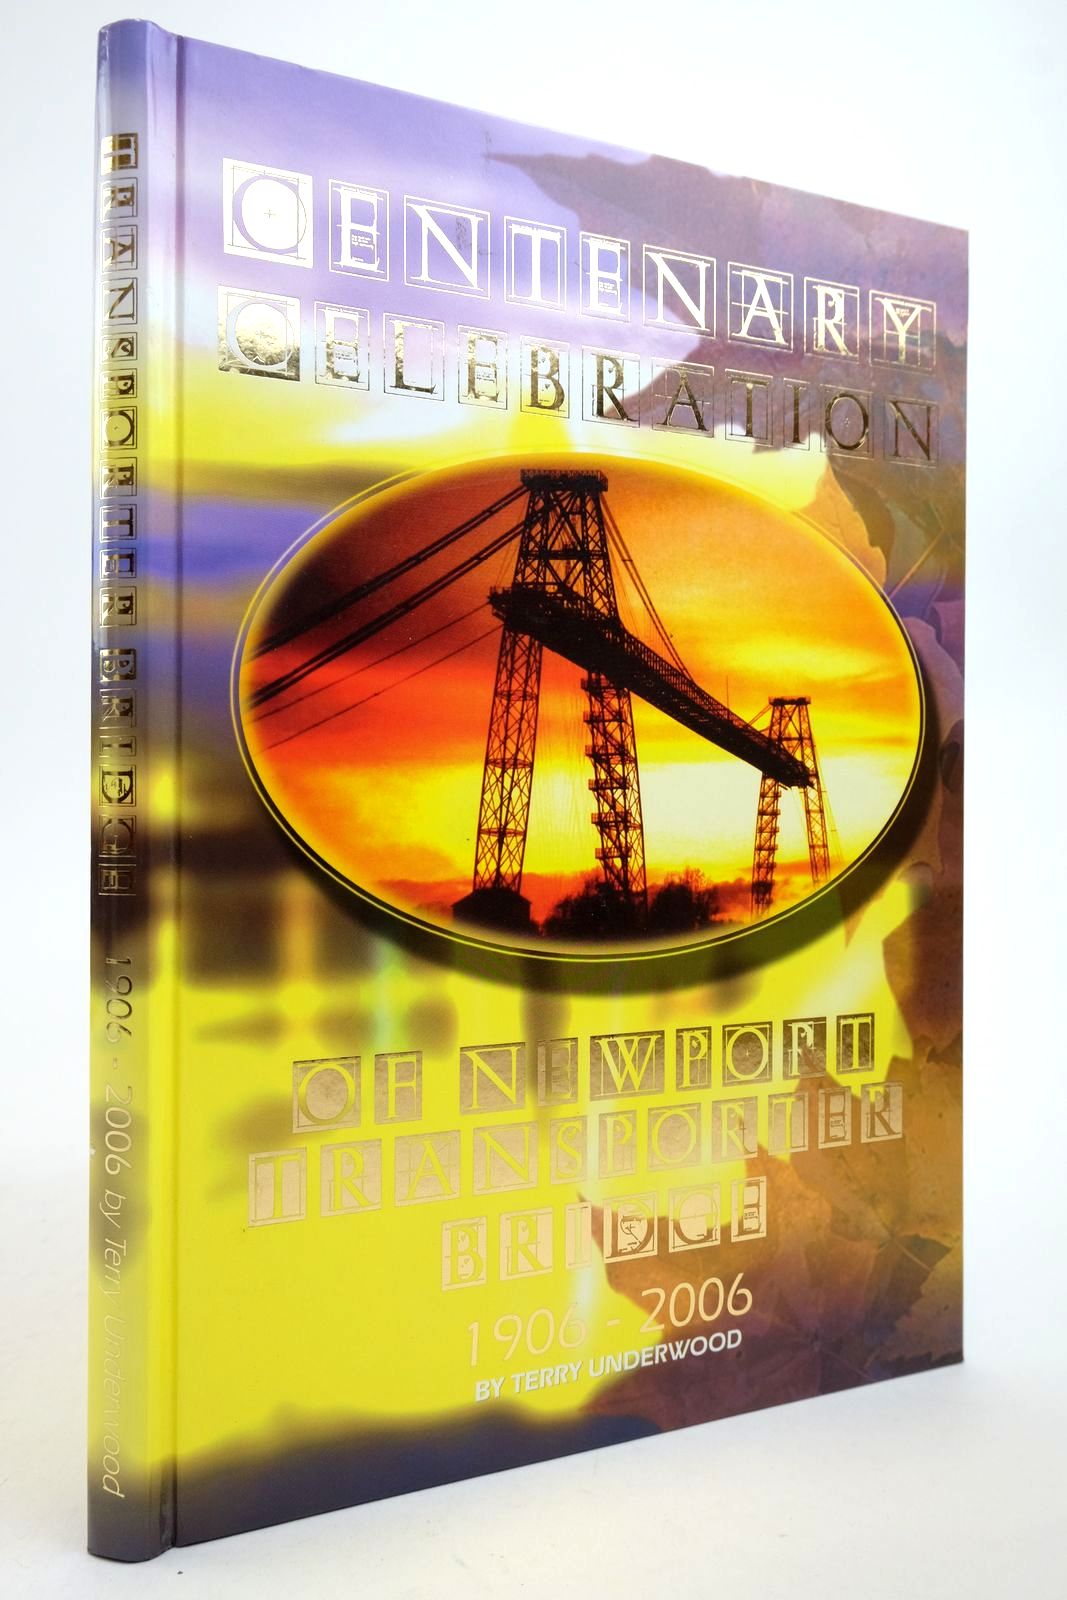 Photo of CENTENARY CELEBRATION OF NEWPORT TRANSPORTER BRIDGE 1906-2006 written by Underwood, Terry published by Rompdown Ltd (STOCK CODE: 2140755)  for sale by Stella & Rose's Books